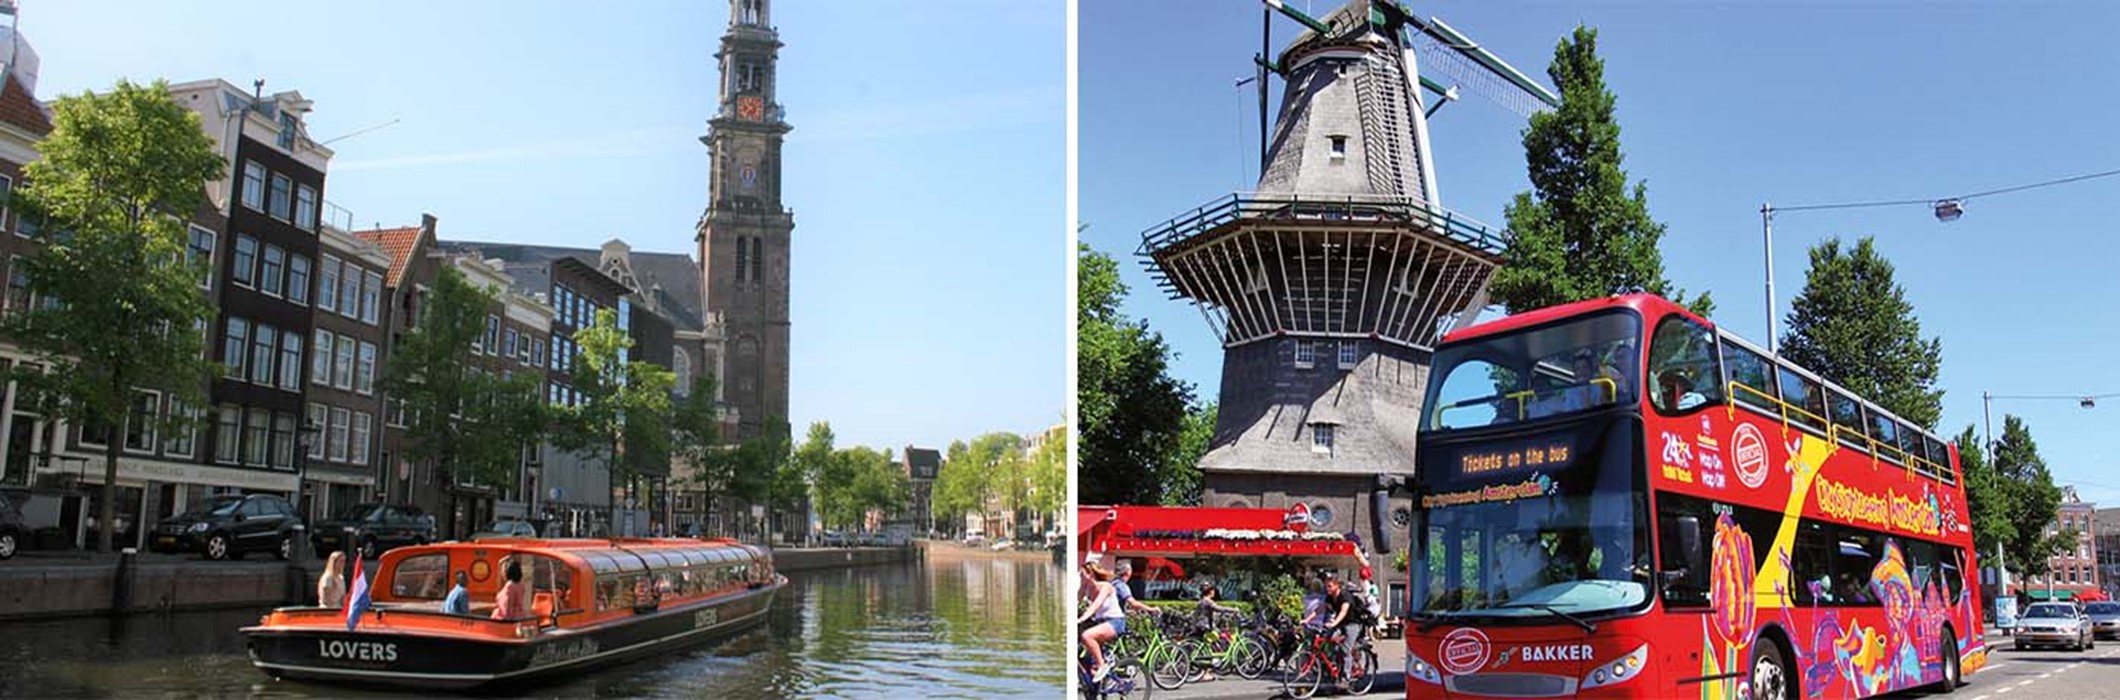 Hop on Hop off bus + Amsterdam Canal Cruise